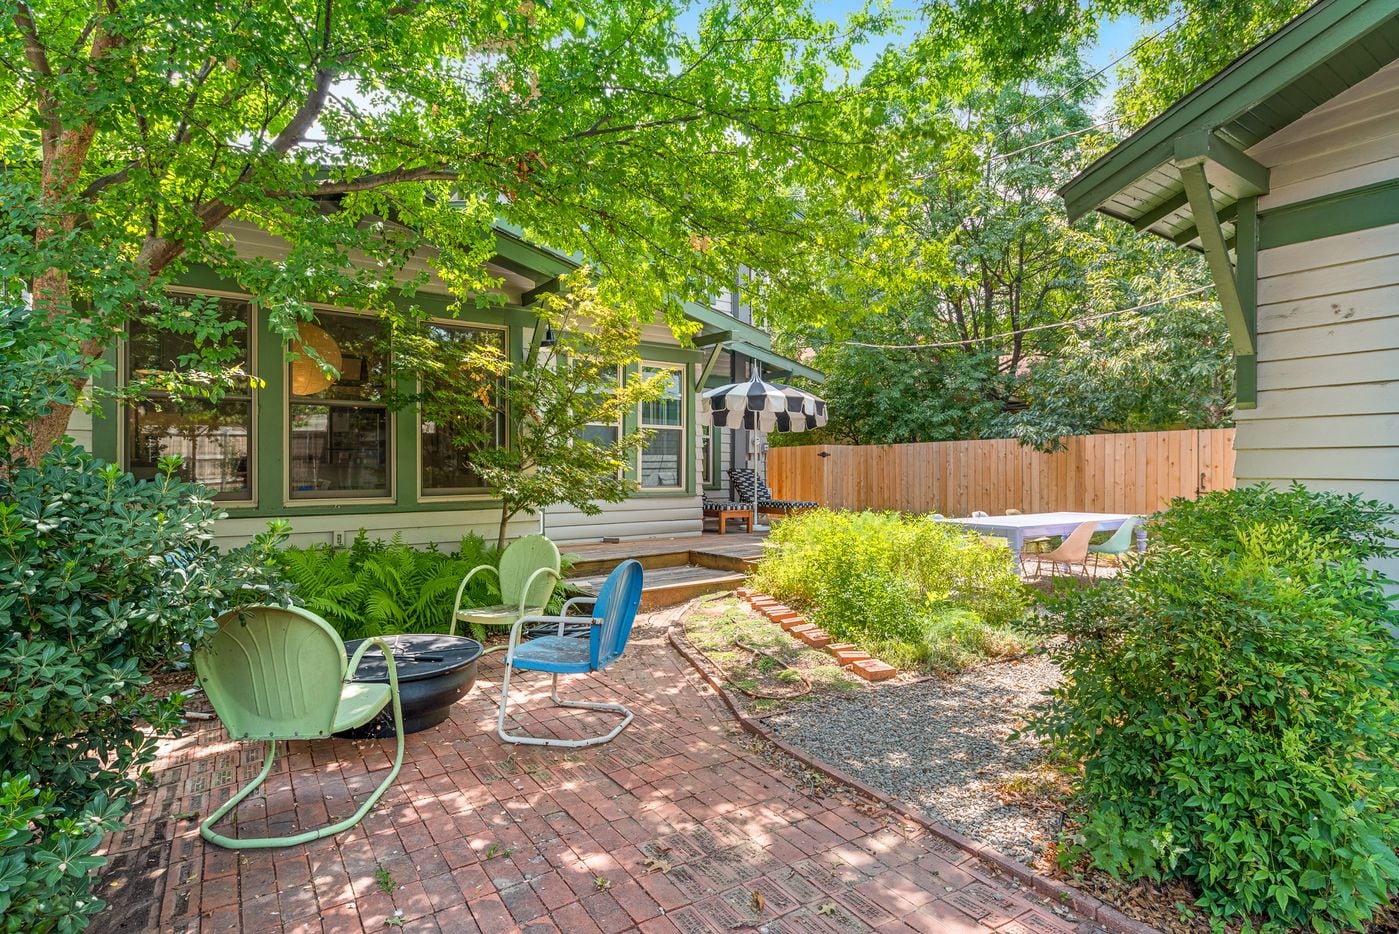 A look at 719 N. Bishop Avenue in Dallas, one of the houses on the 2019 Heritage Oak Cliff...